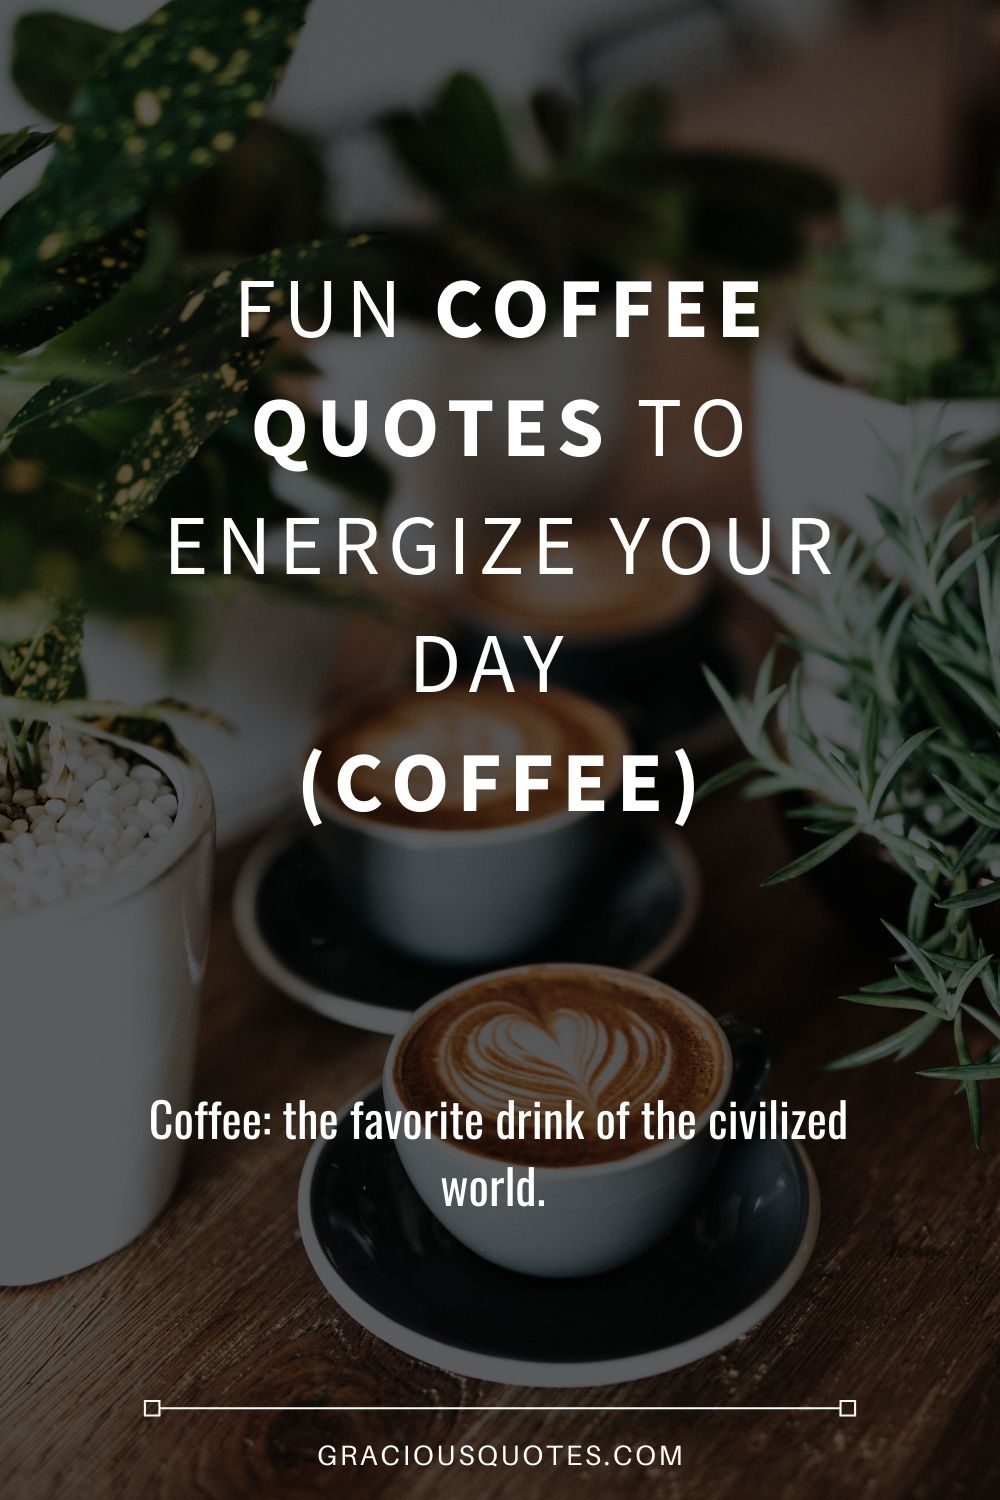 Fun-Coffee-Quotes-to-Energize-Your-Day-COFFEE-Gracious-Quotes